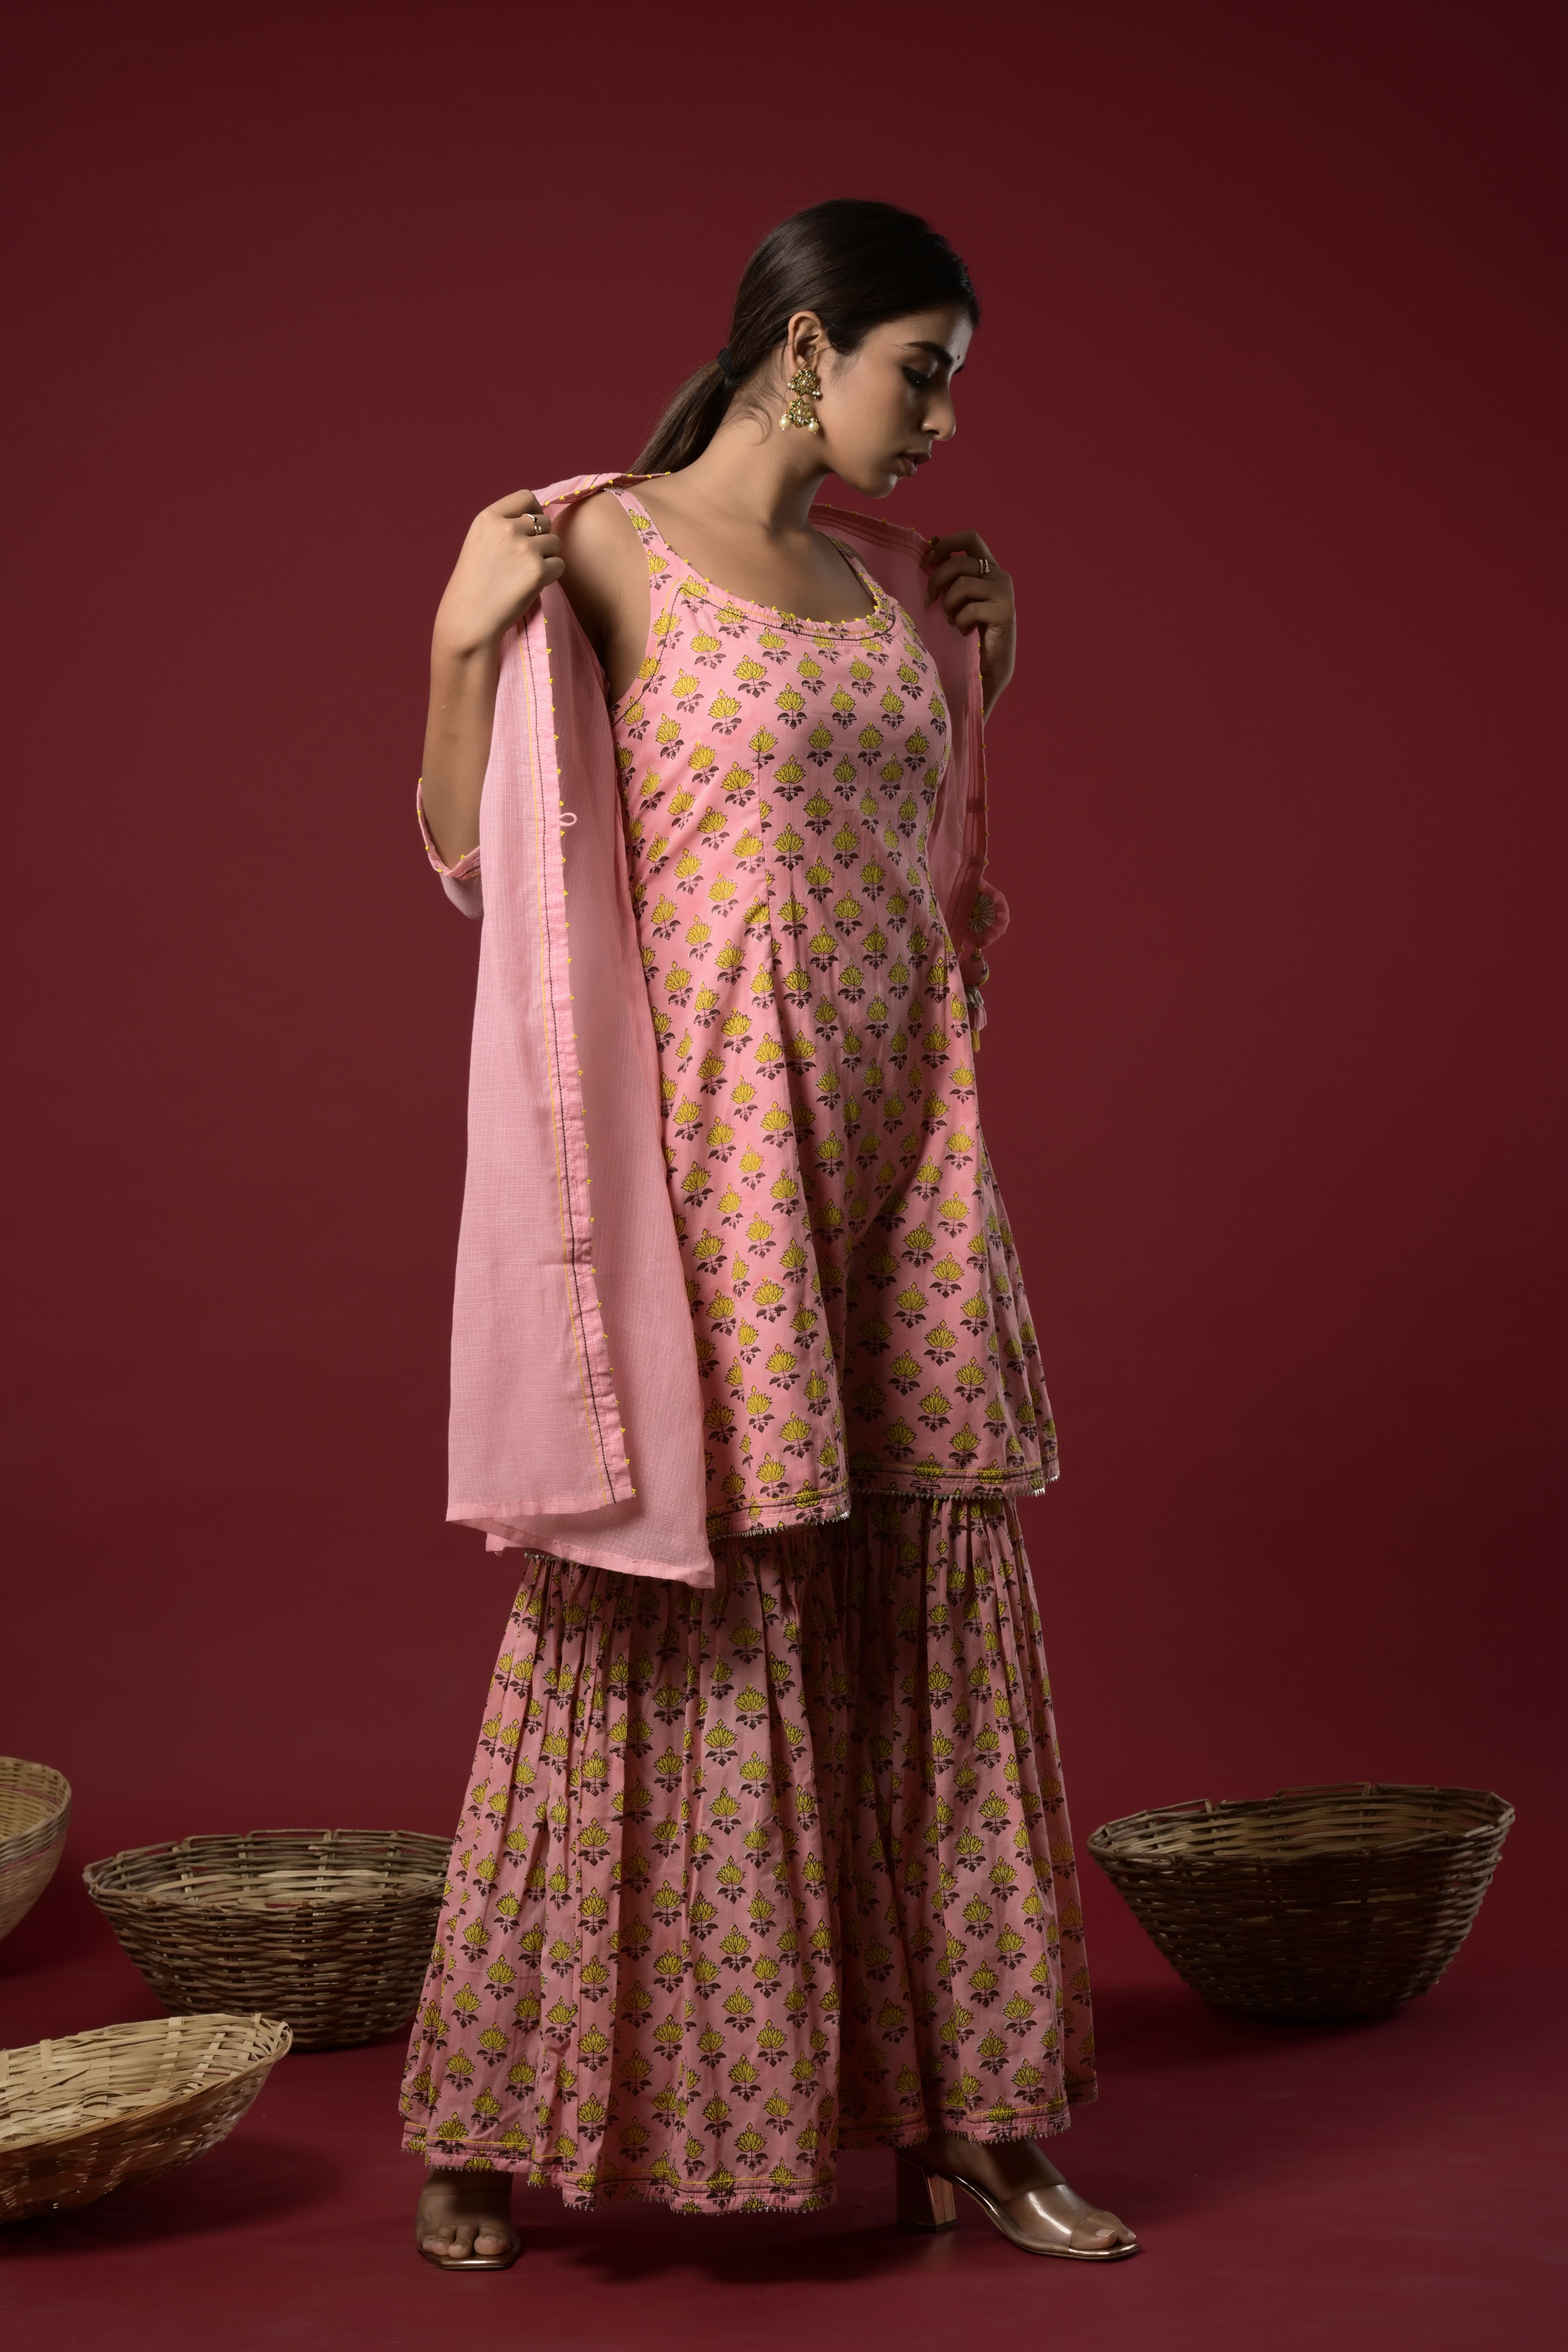 KAARAH BY KAAVYA | Block printed short kurta and sharara with embellishment on the neck and kota doriya jacket with tassel in the front. undefined